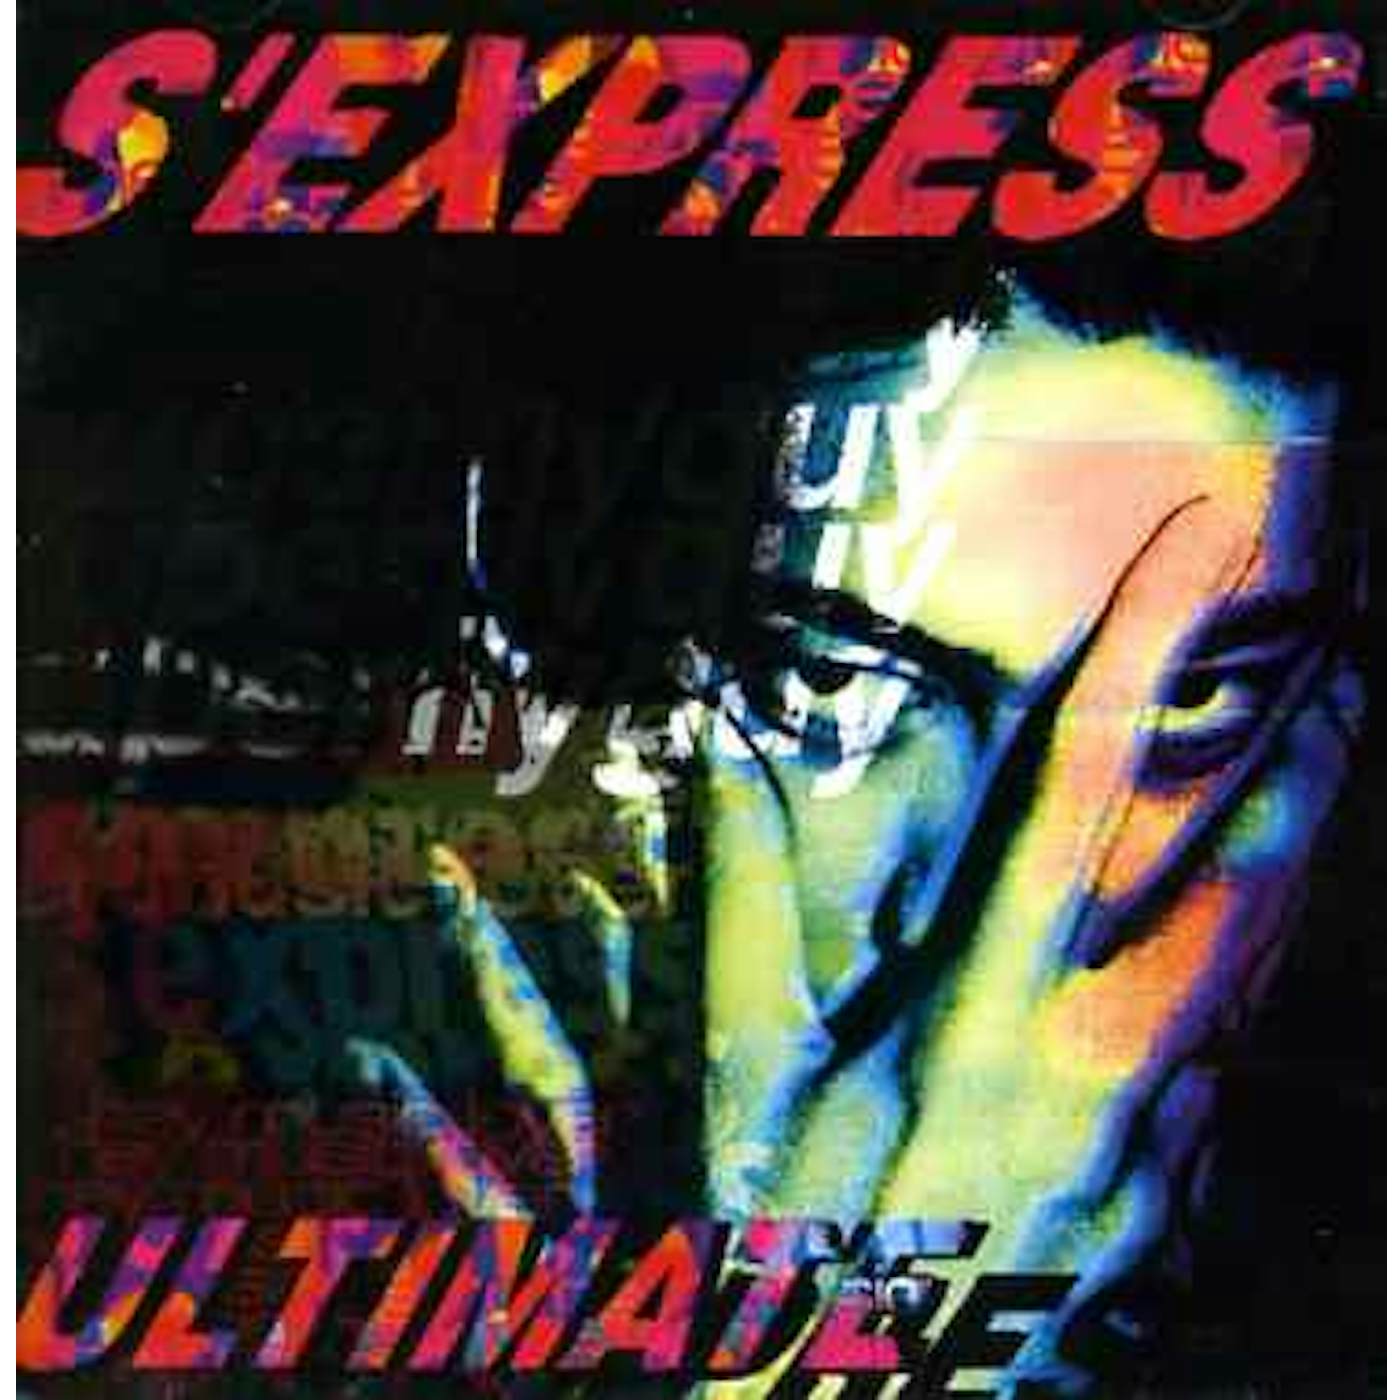 S'Express ULTIMATE CD